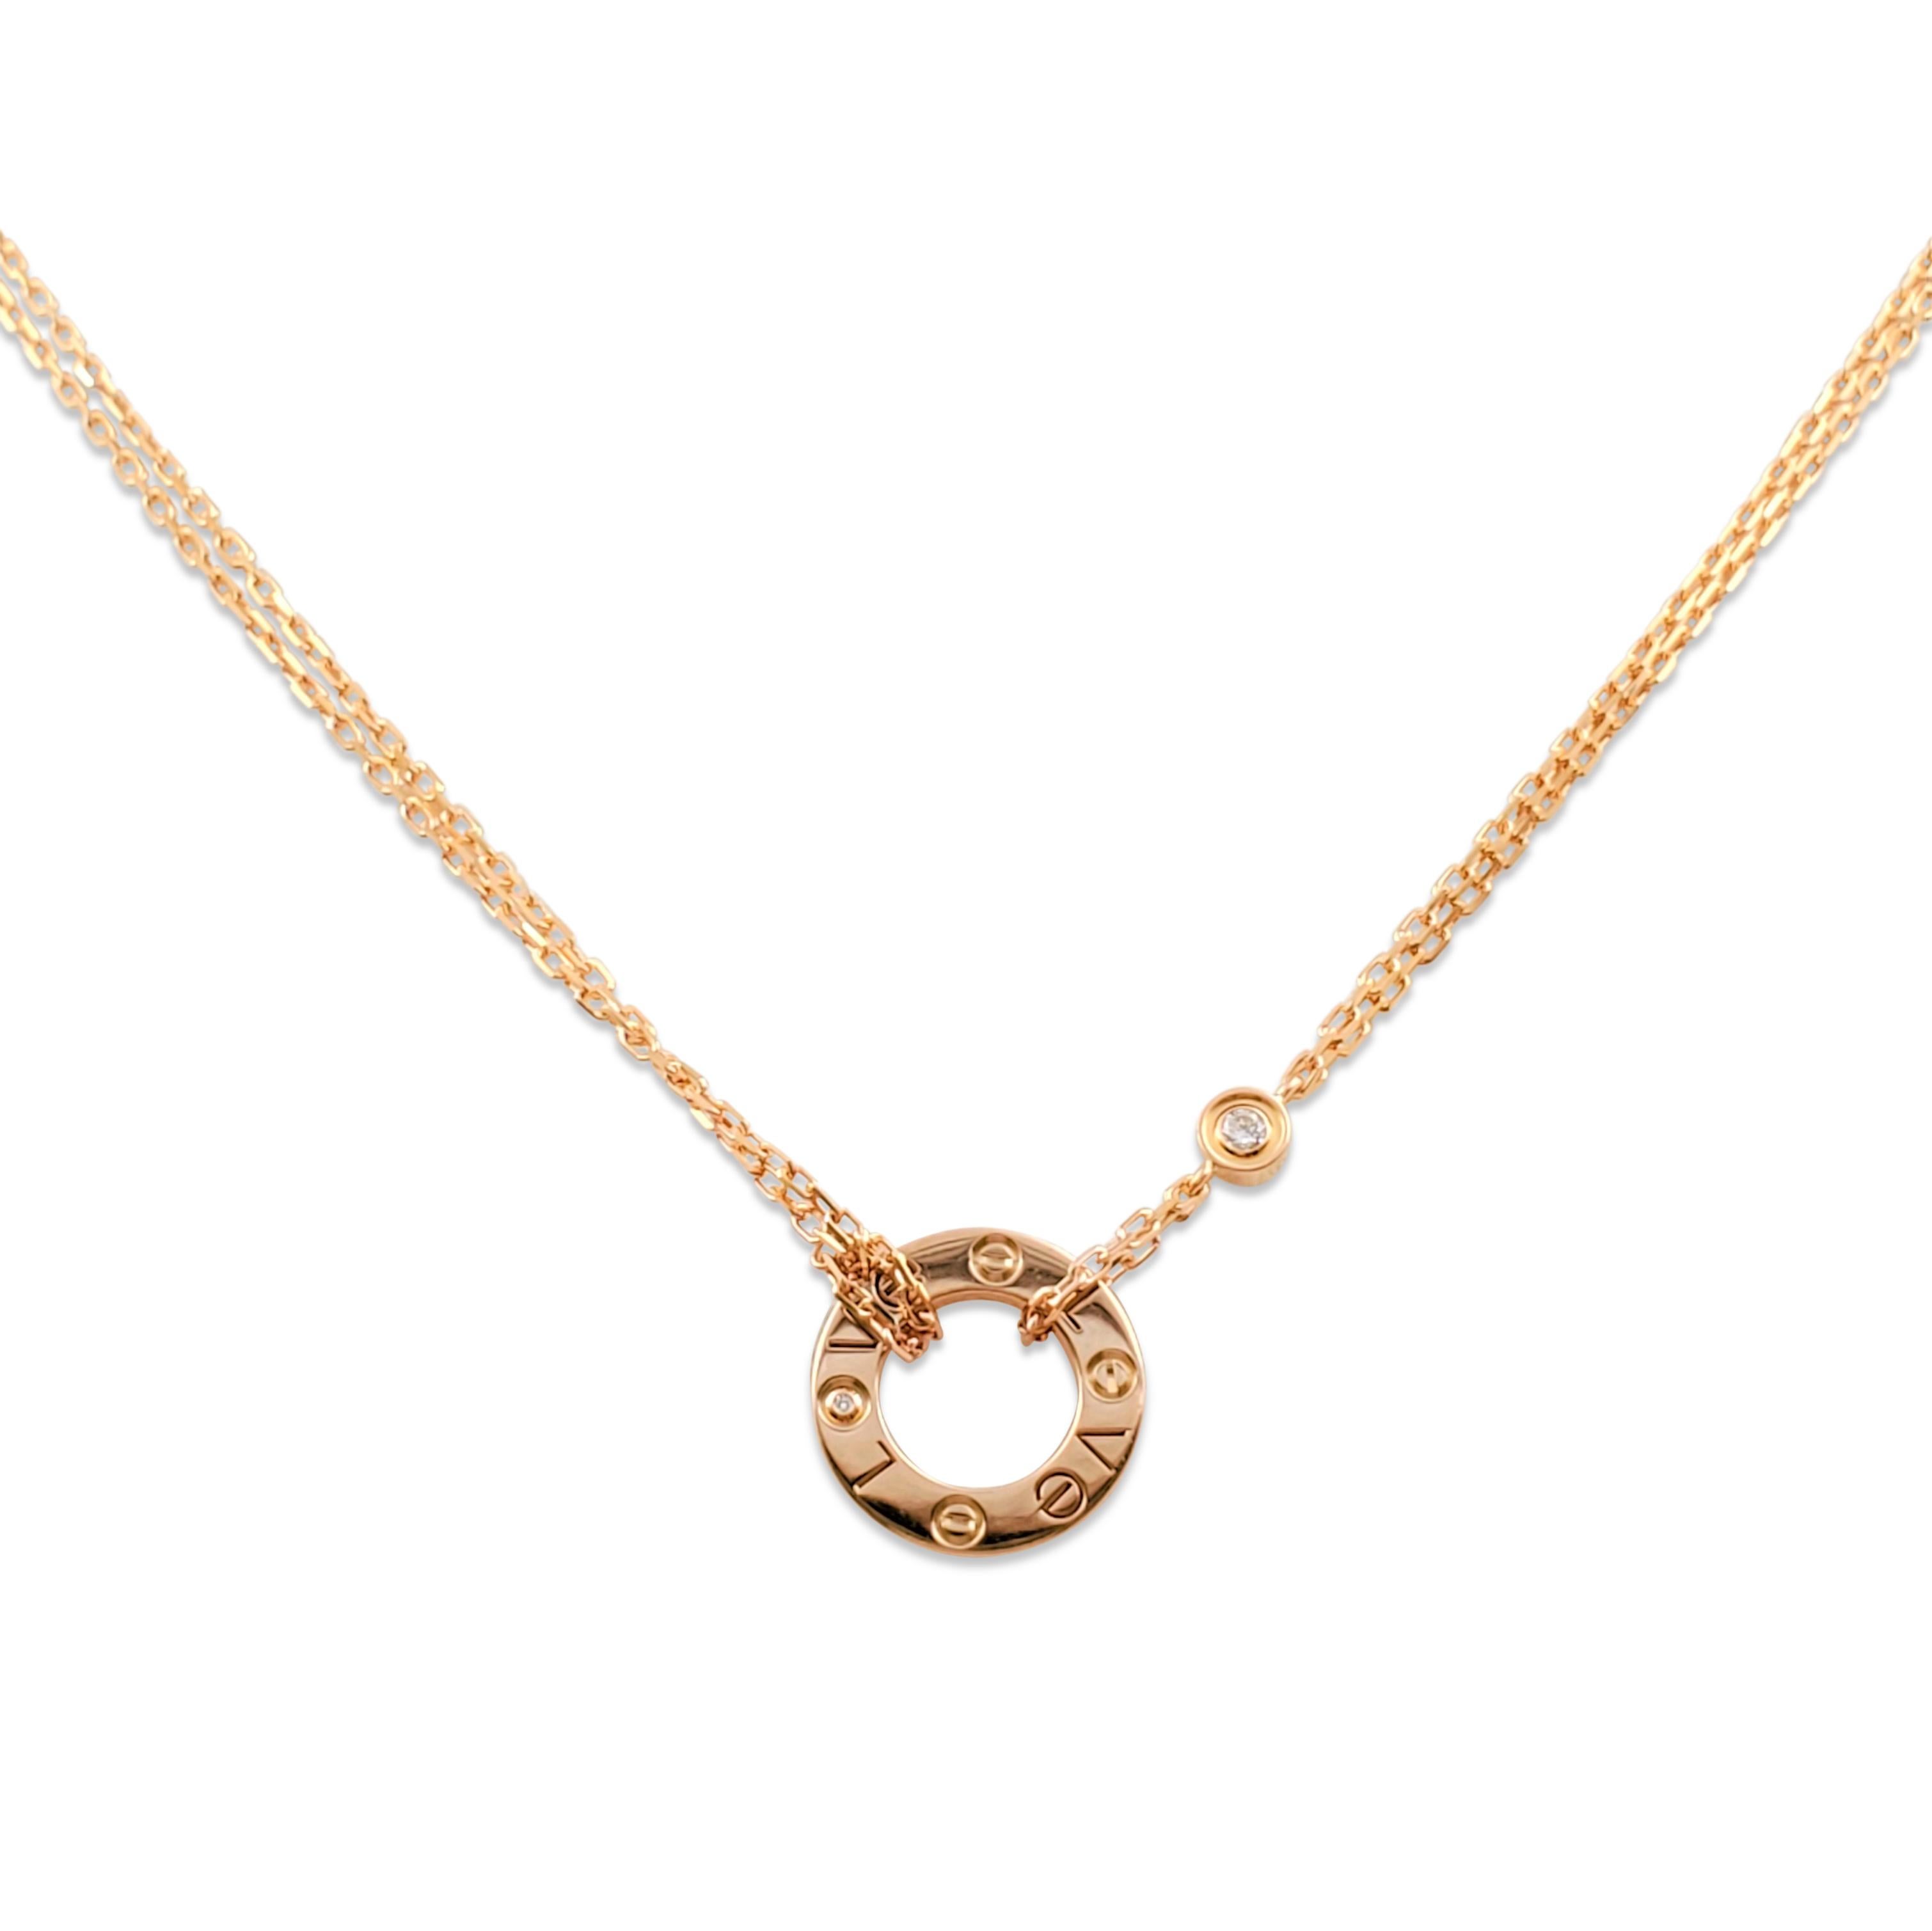 Authentic chain and ring charm necklace from the Cartier 'Love' collection. Crafted in 18 karat rose gold, the double-strand oval-link chain features a half-inch round ring and screw top motifs set with two round brilliant cut diamonds (E-F color,